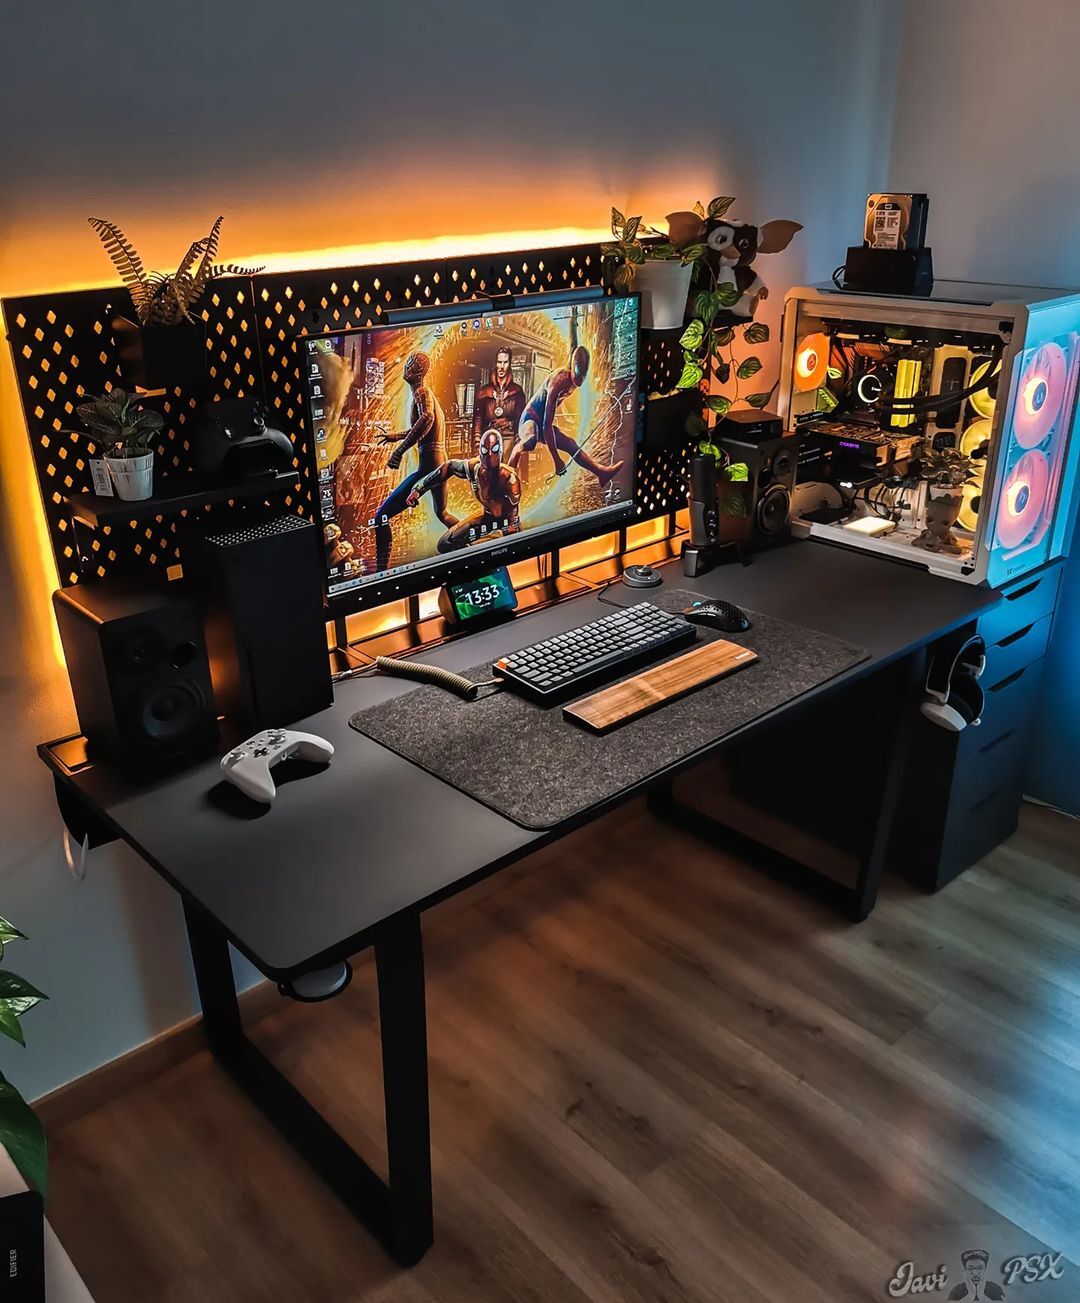 The Bifrost 160: A gaming desk for the perfect gamer hideout